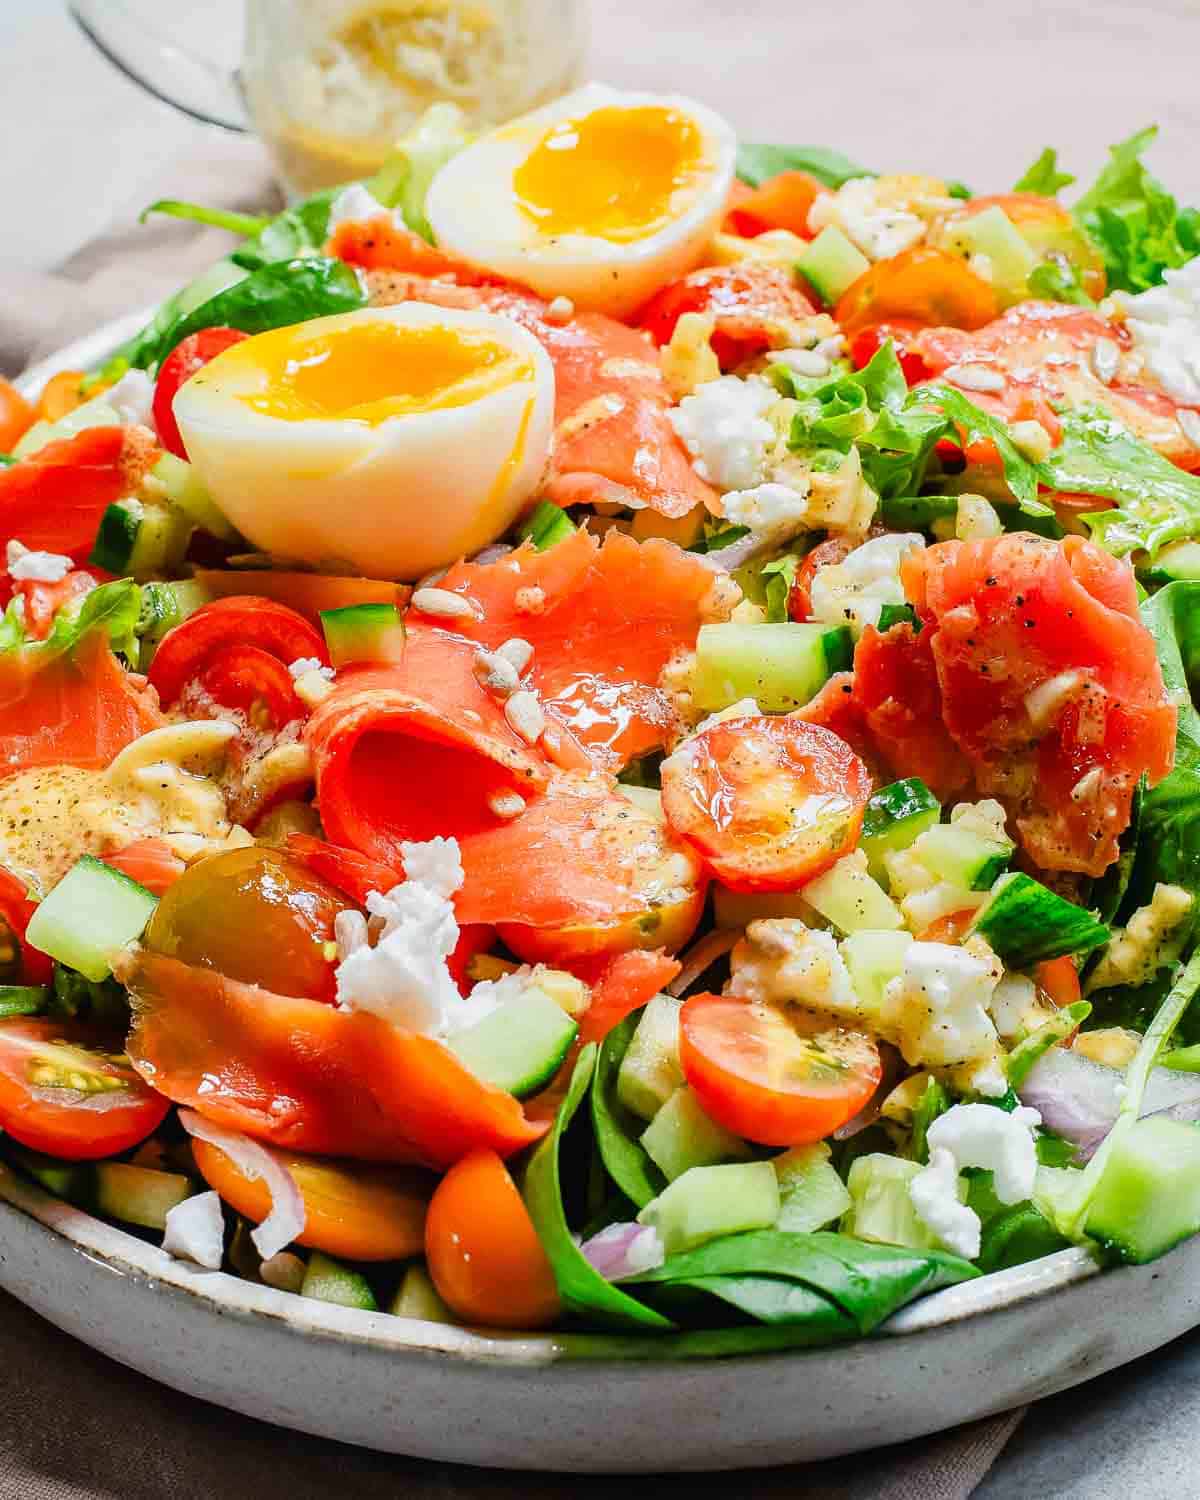 A vibrant salad with smoked salmon, boiled eggs, cherry tomatoes, cucumbers, and crumbled feta cheese, served in a gray bowl.